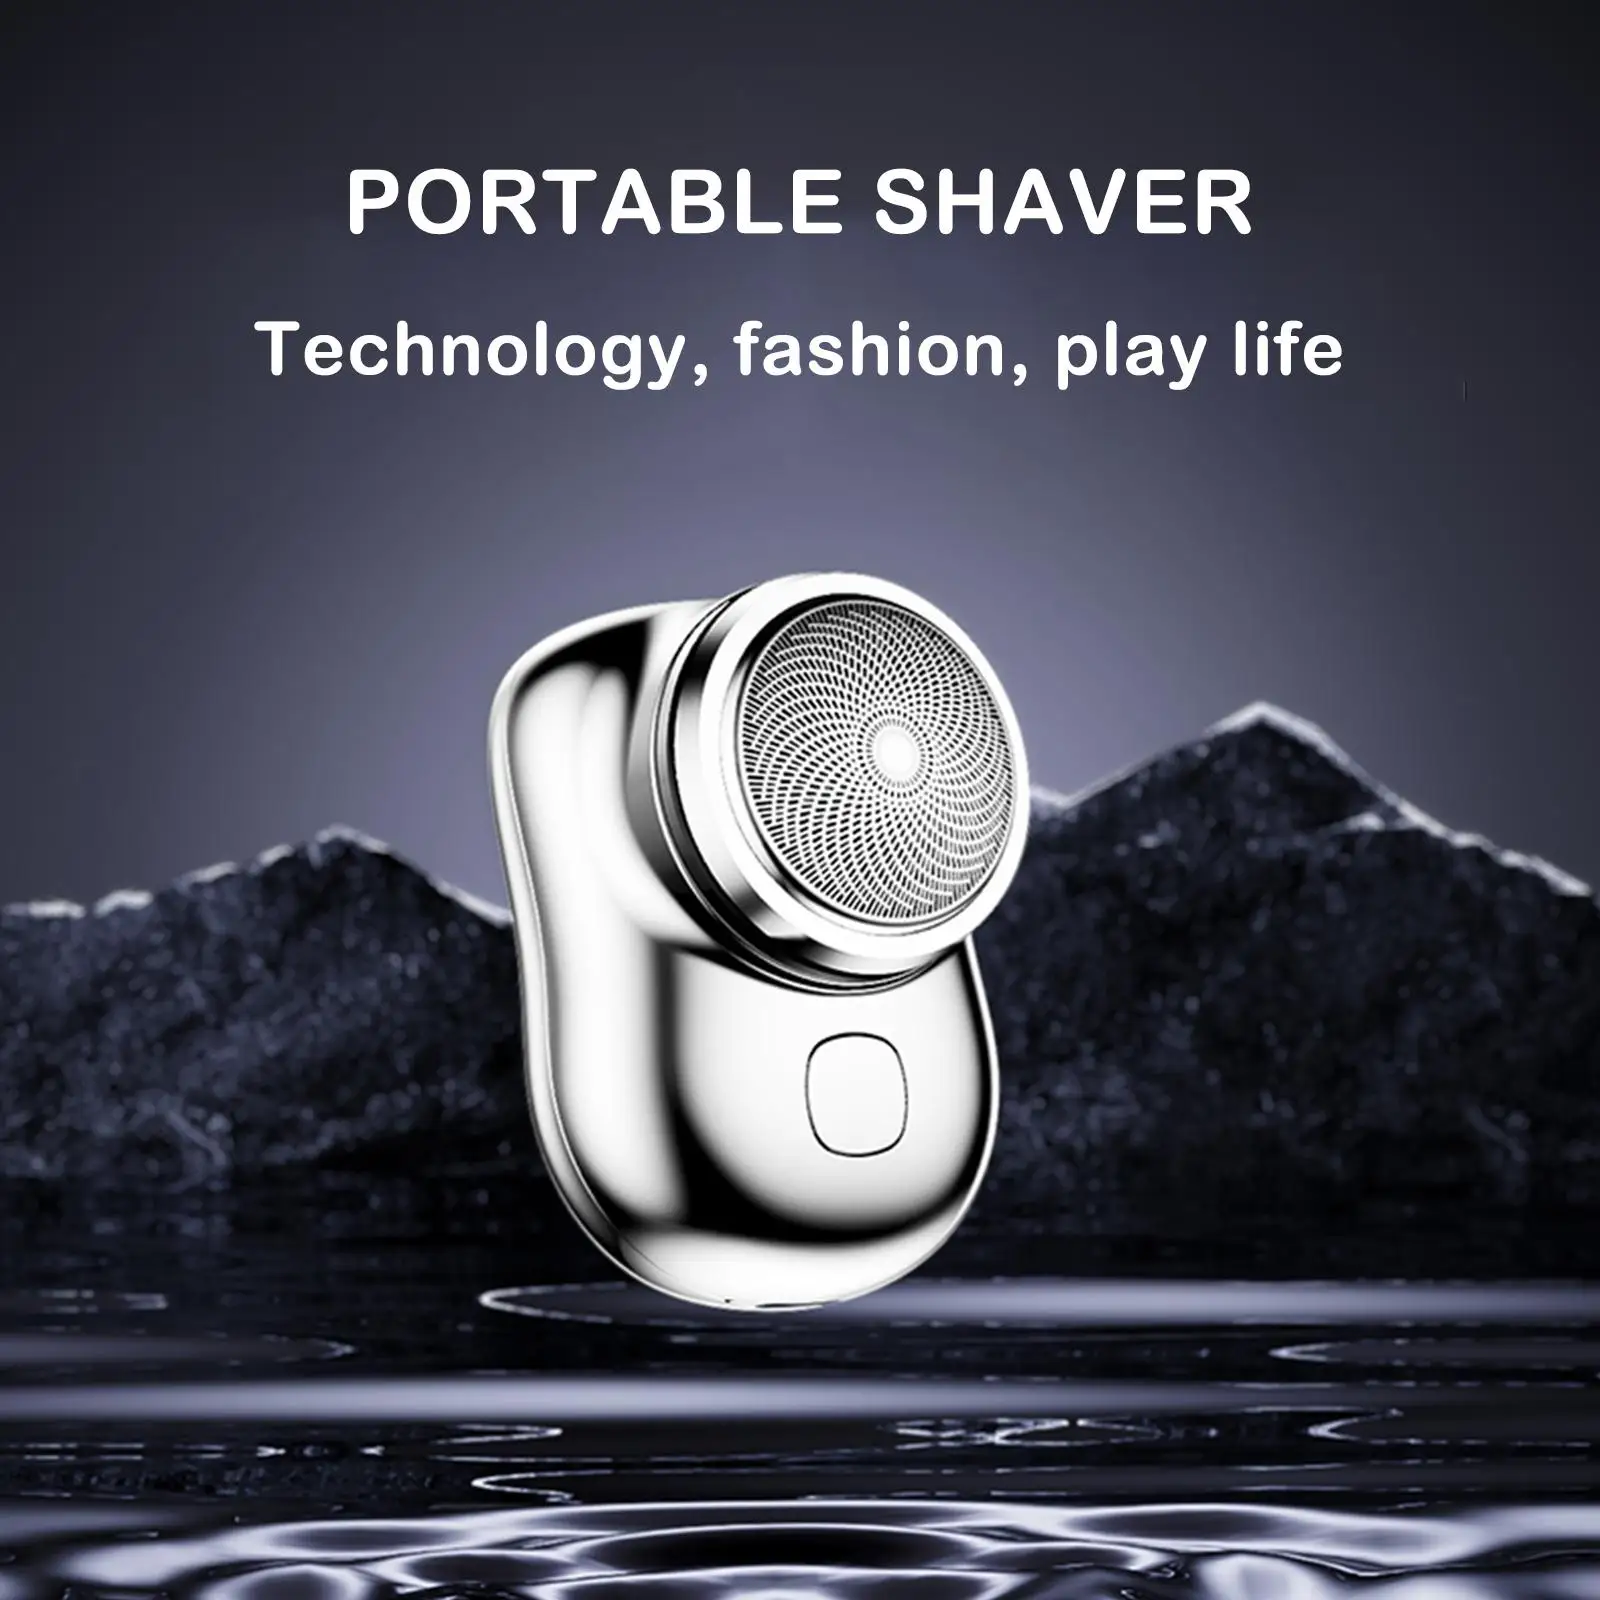 Mini-shave Portable Electric Shaver USB Rechargeable Electric Shaver Type-c Fast Charging Pocket Razor Beard Trimmer Shaving